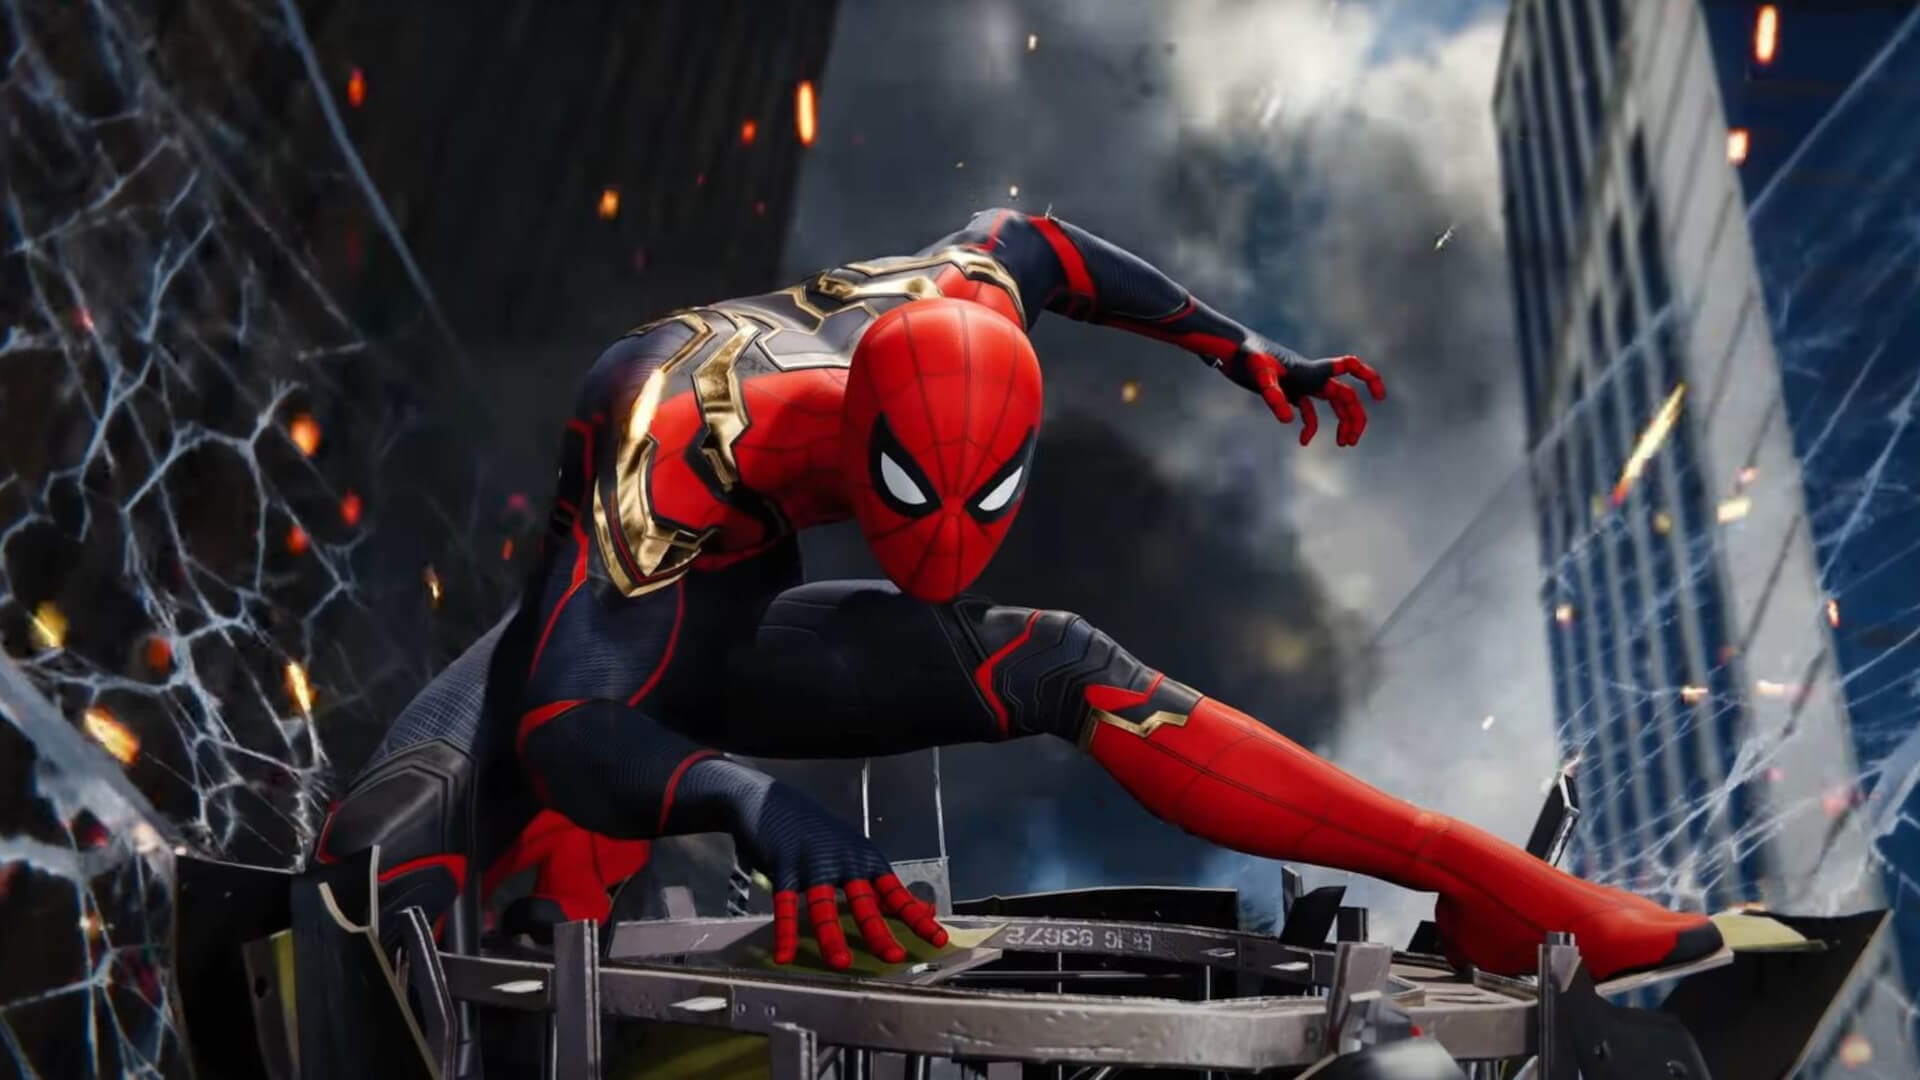 Marvel's Spider-Man 2 Upcoming December Update - New Suits, Features, & DLC  